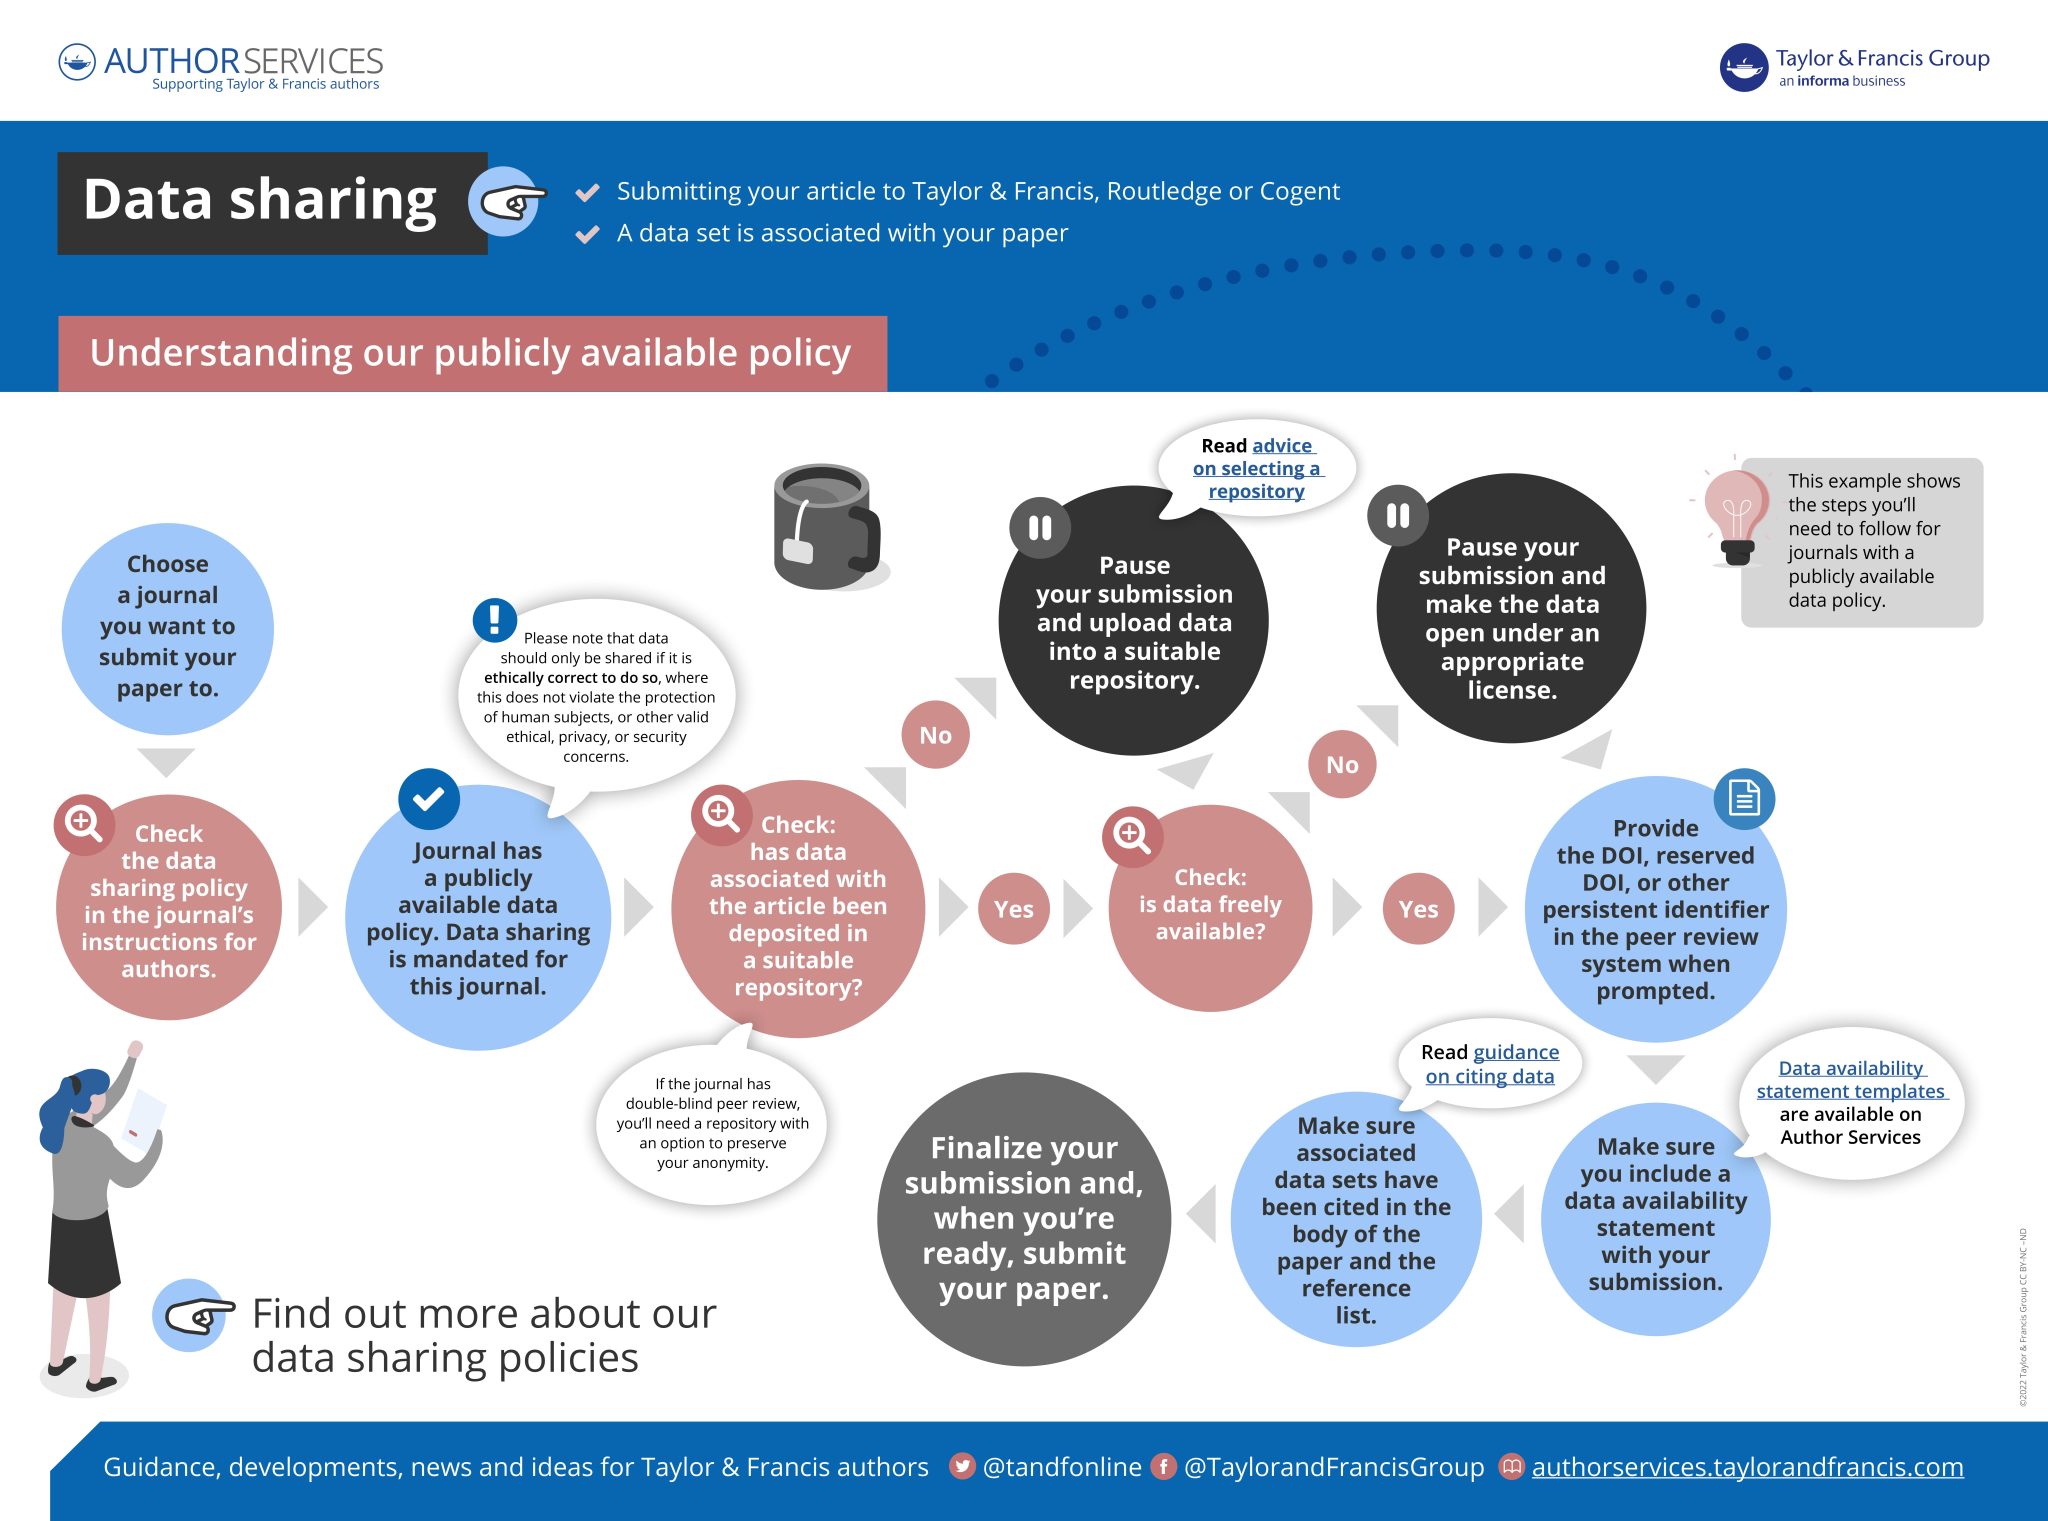 Infographic giving guidance on our publicly available data sharing policy.